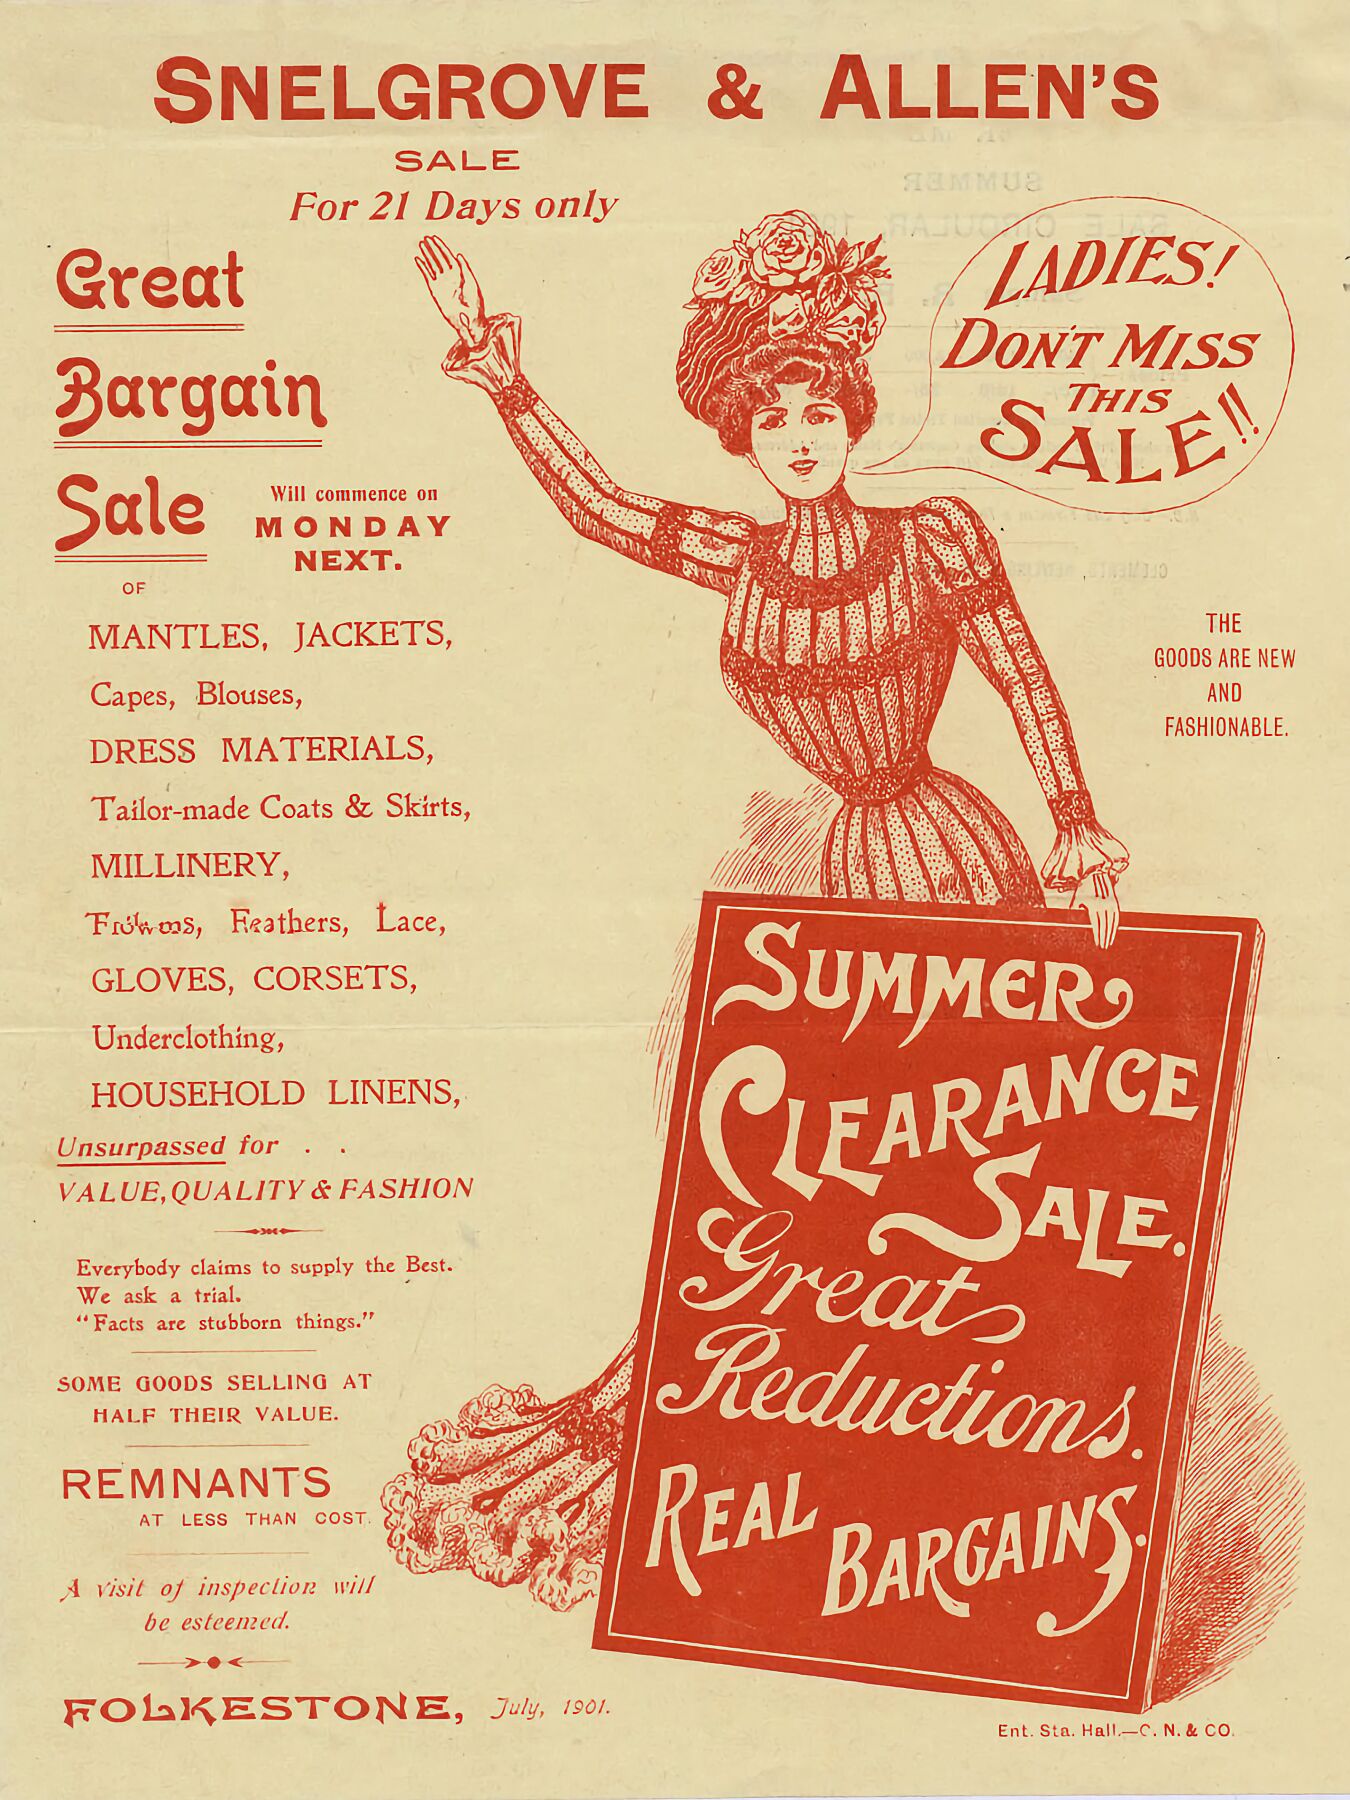 Advert for a clothing sale at Snelgrove and Allen, which lists the types of clothes on sale, 1901